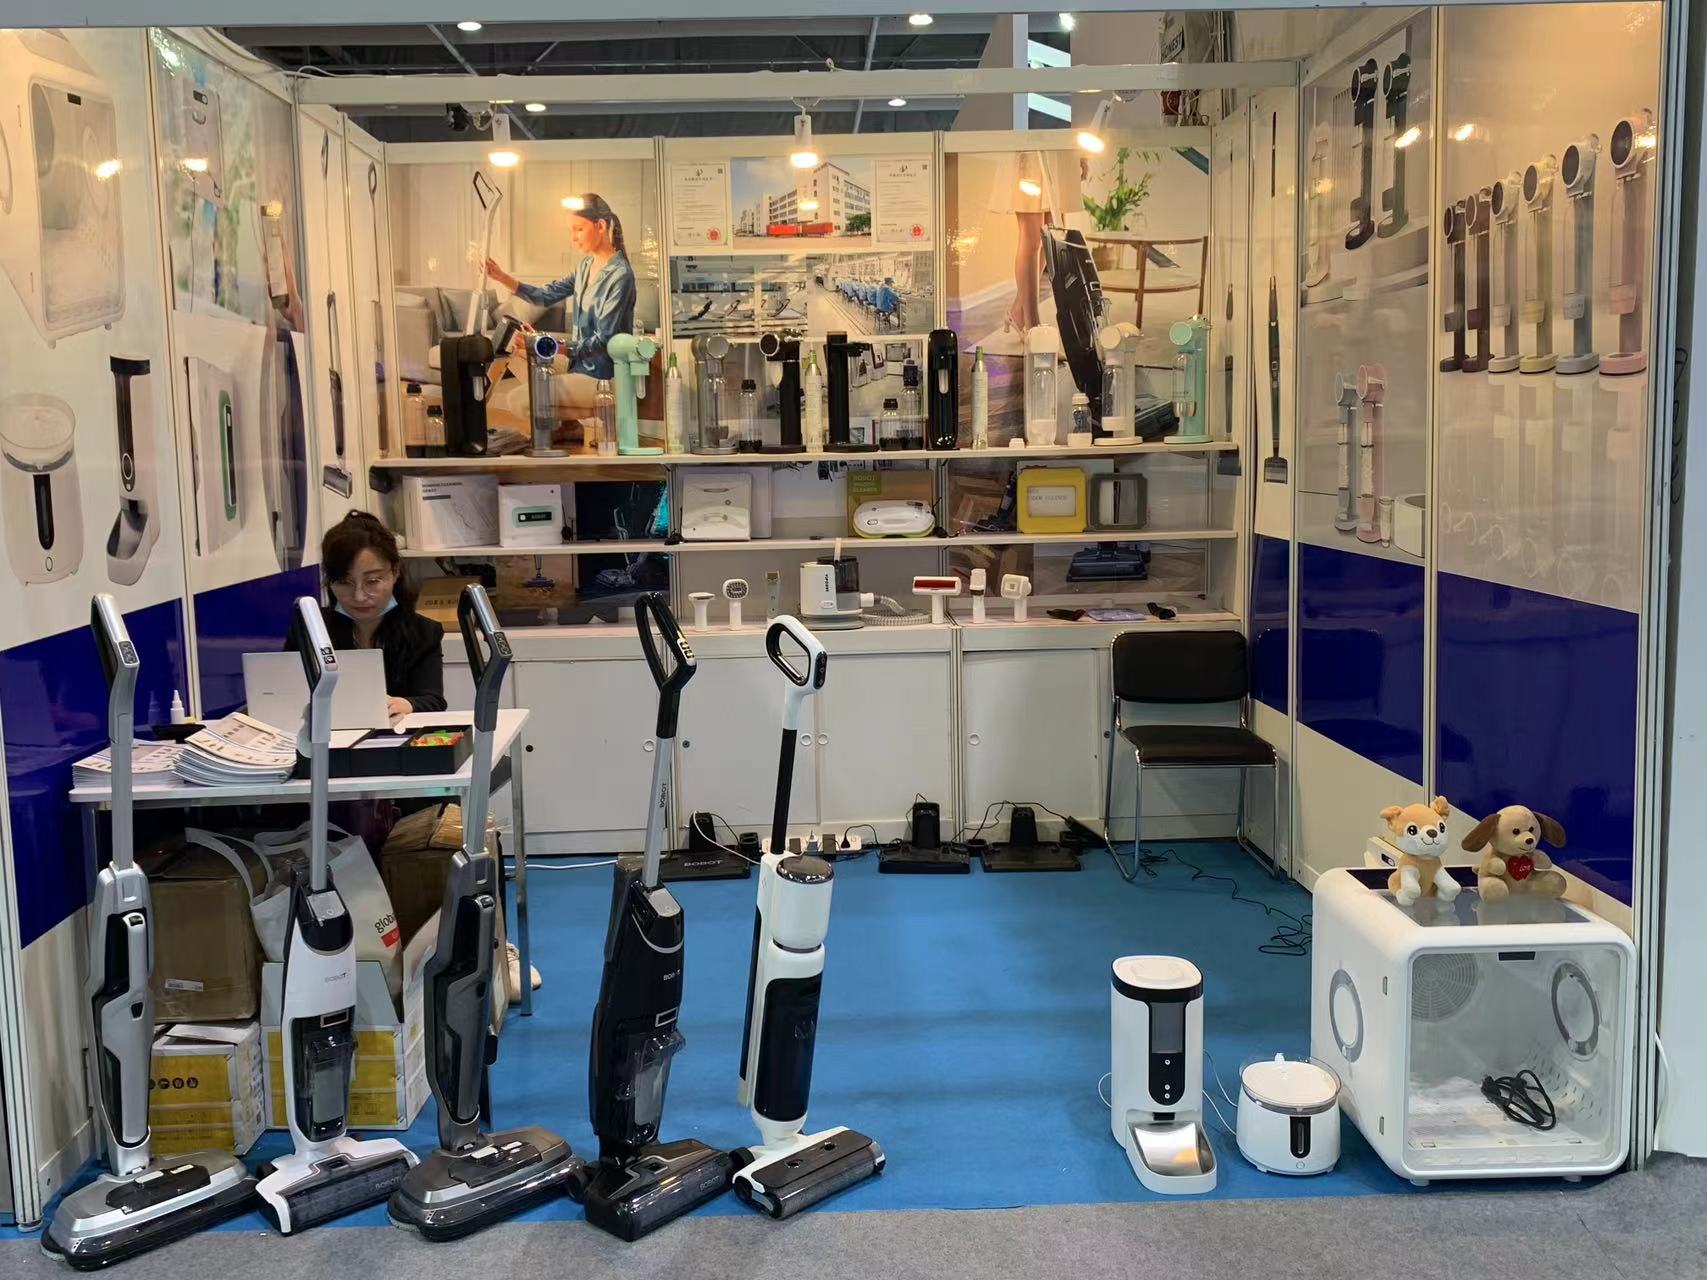 Bengbu MiFan Technology Co., Ltd Invites Visitors to Explore Innovative Cleaning Tools at Global Sources Exhibitions in Hong Kong - Company News - 1